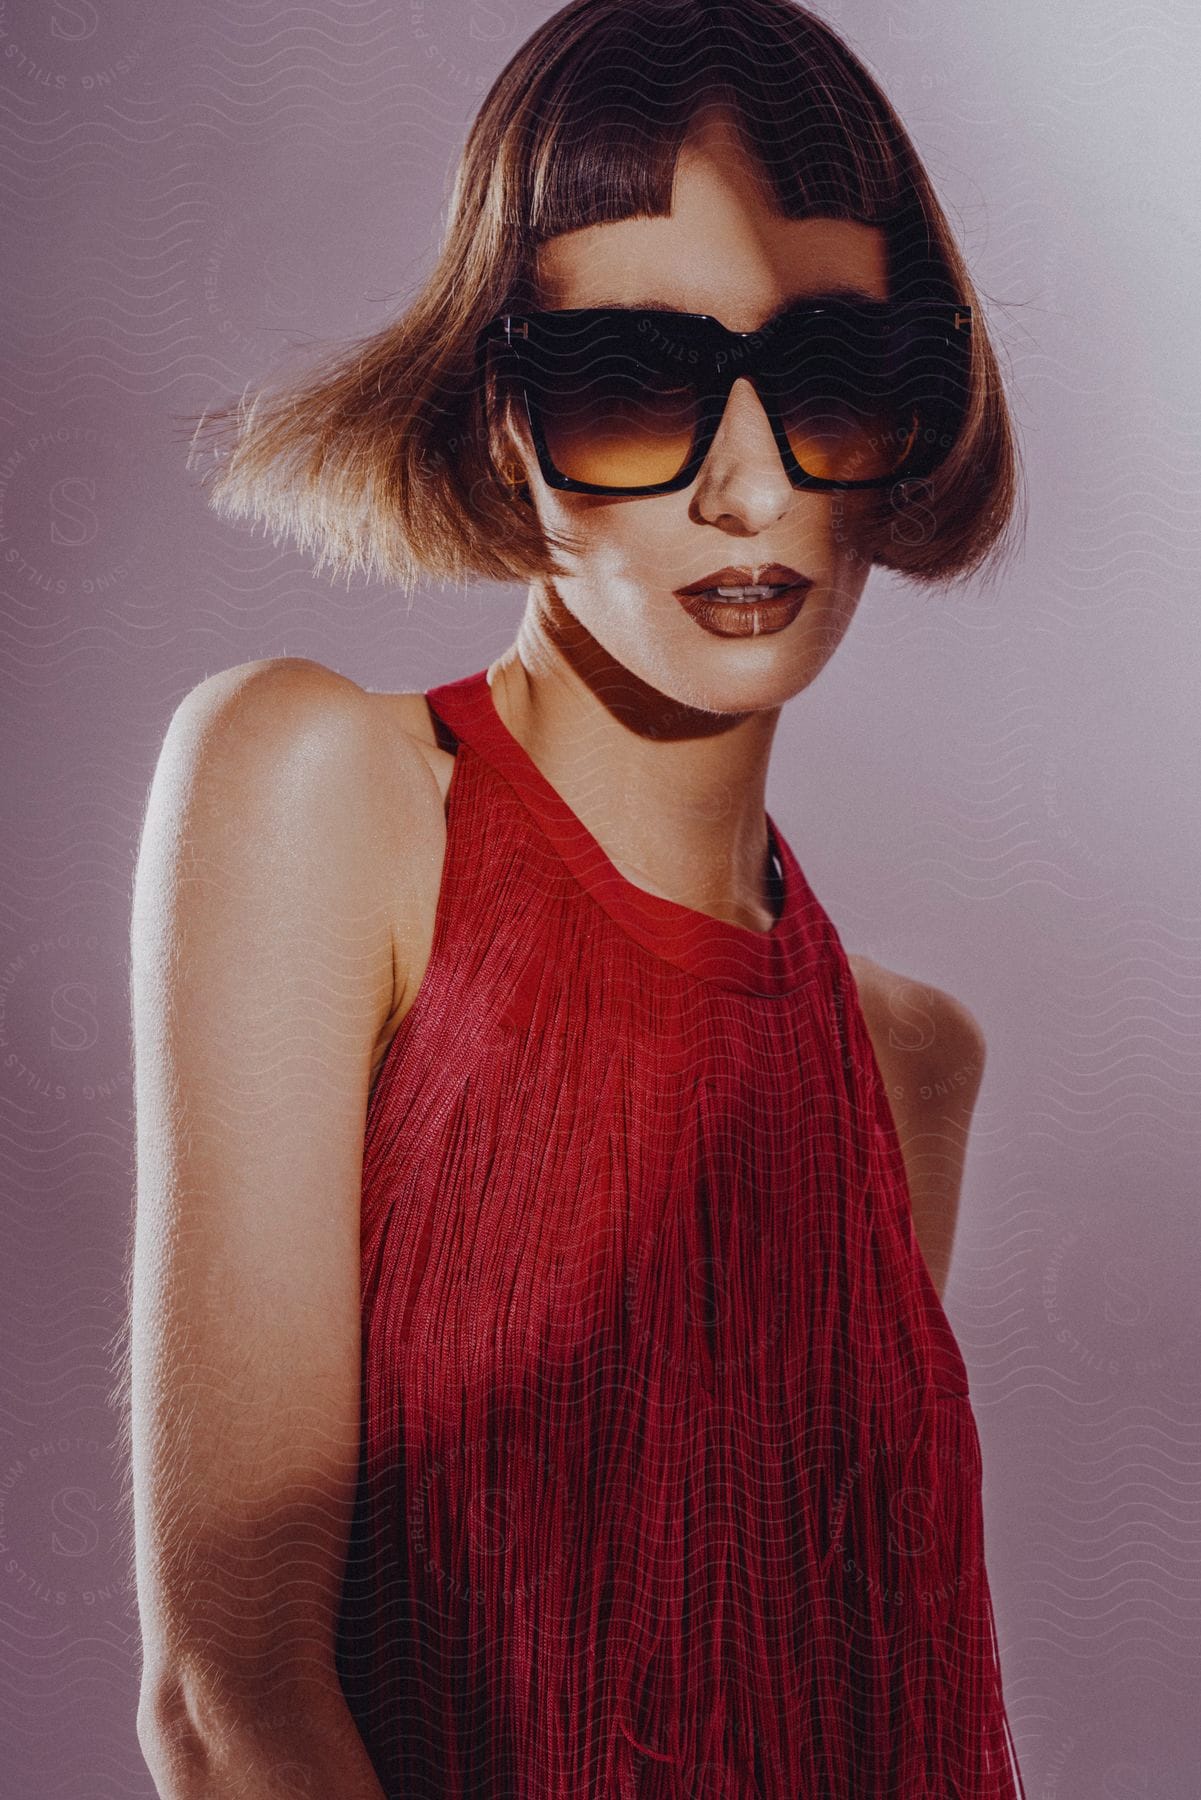 Female model with a bob haircut sunglasses and red TIERED FRINGE MINI DRESS poses for the camera